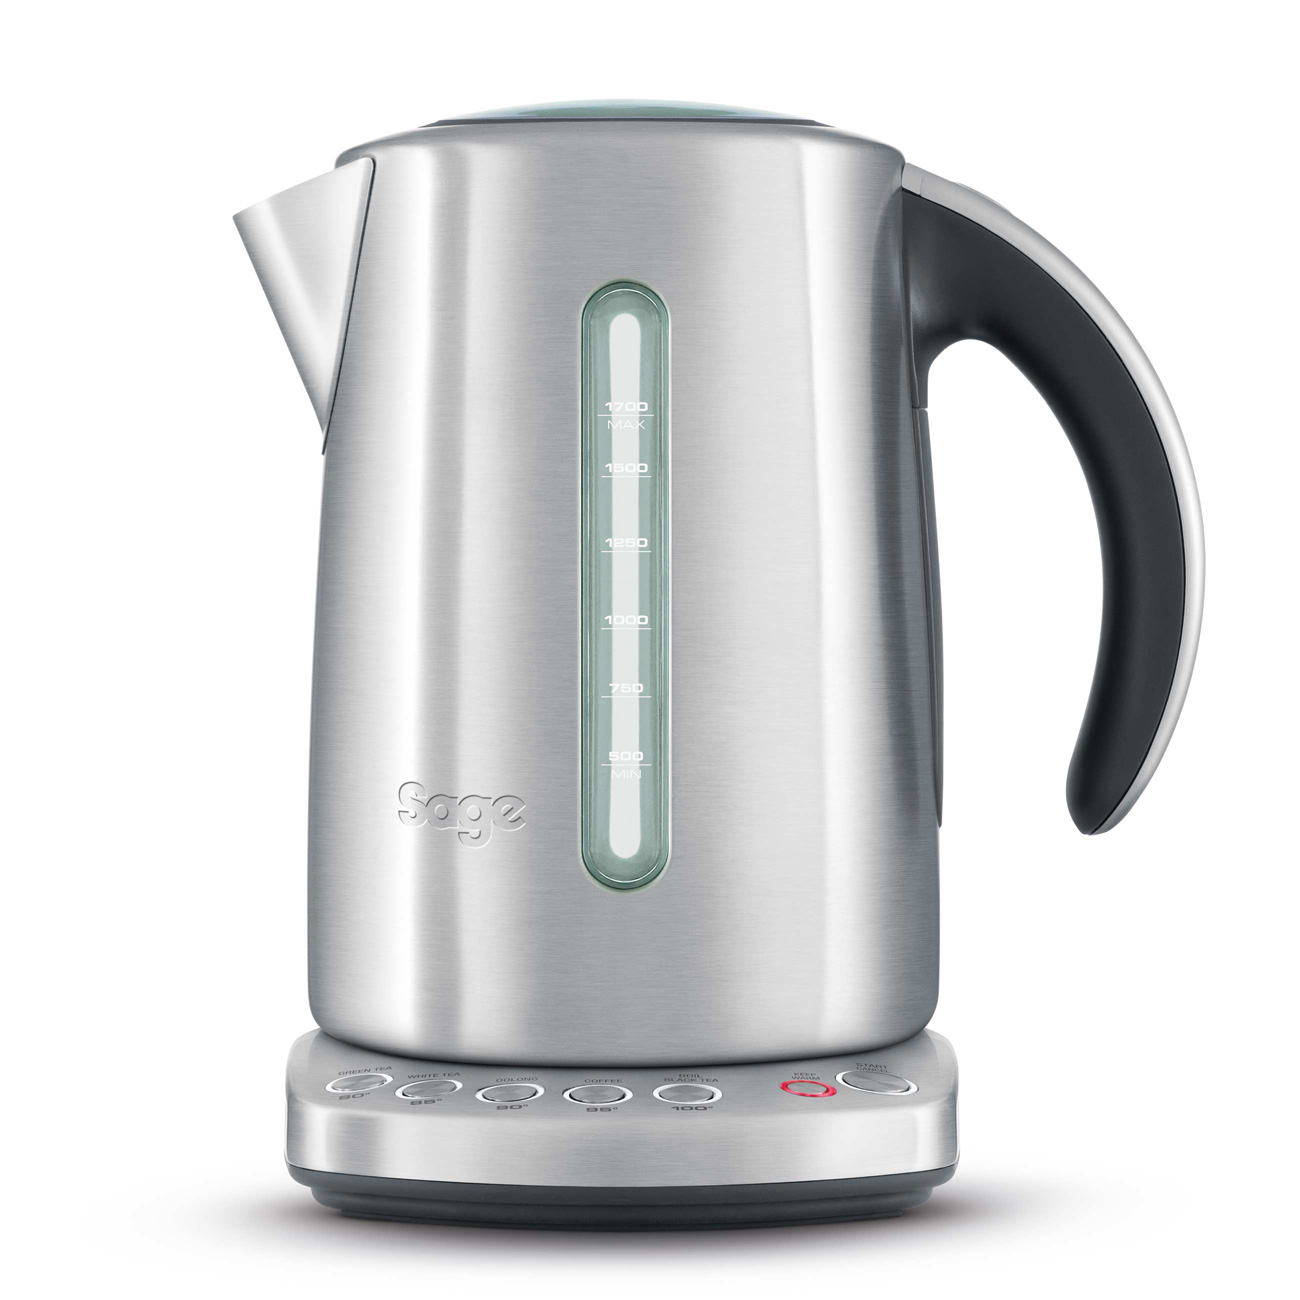 the Smart Kettle